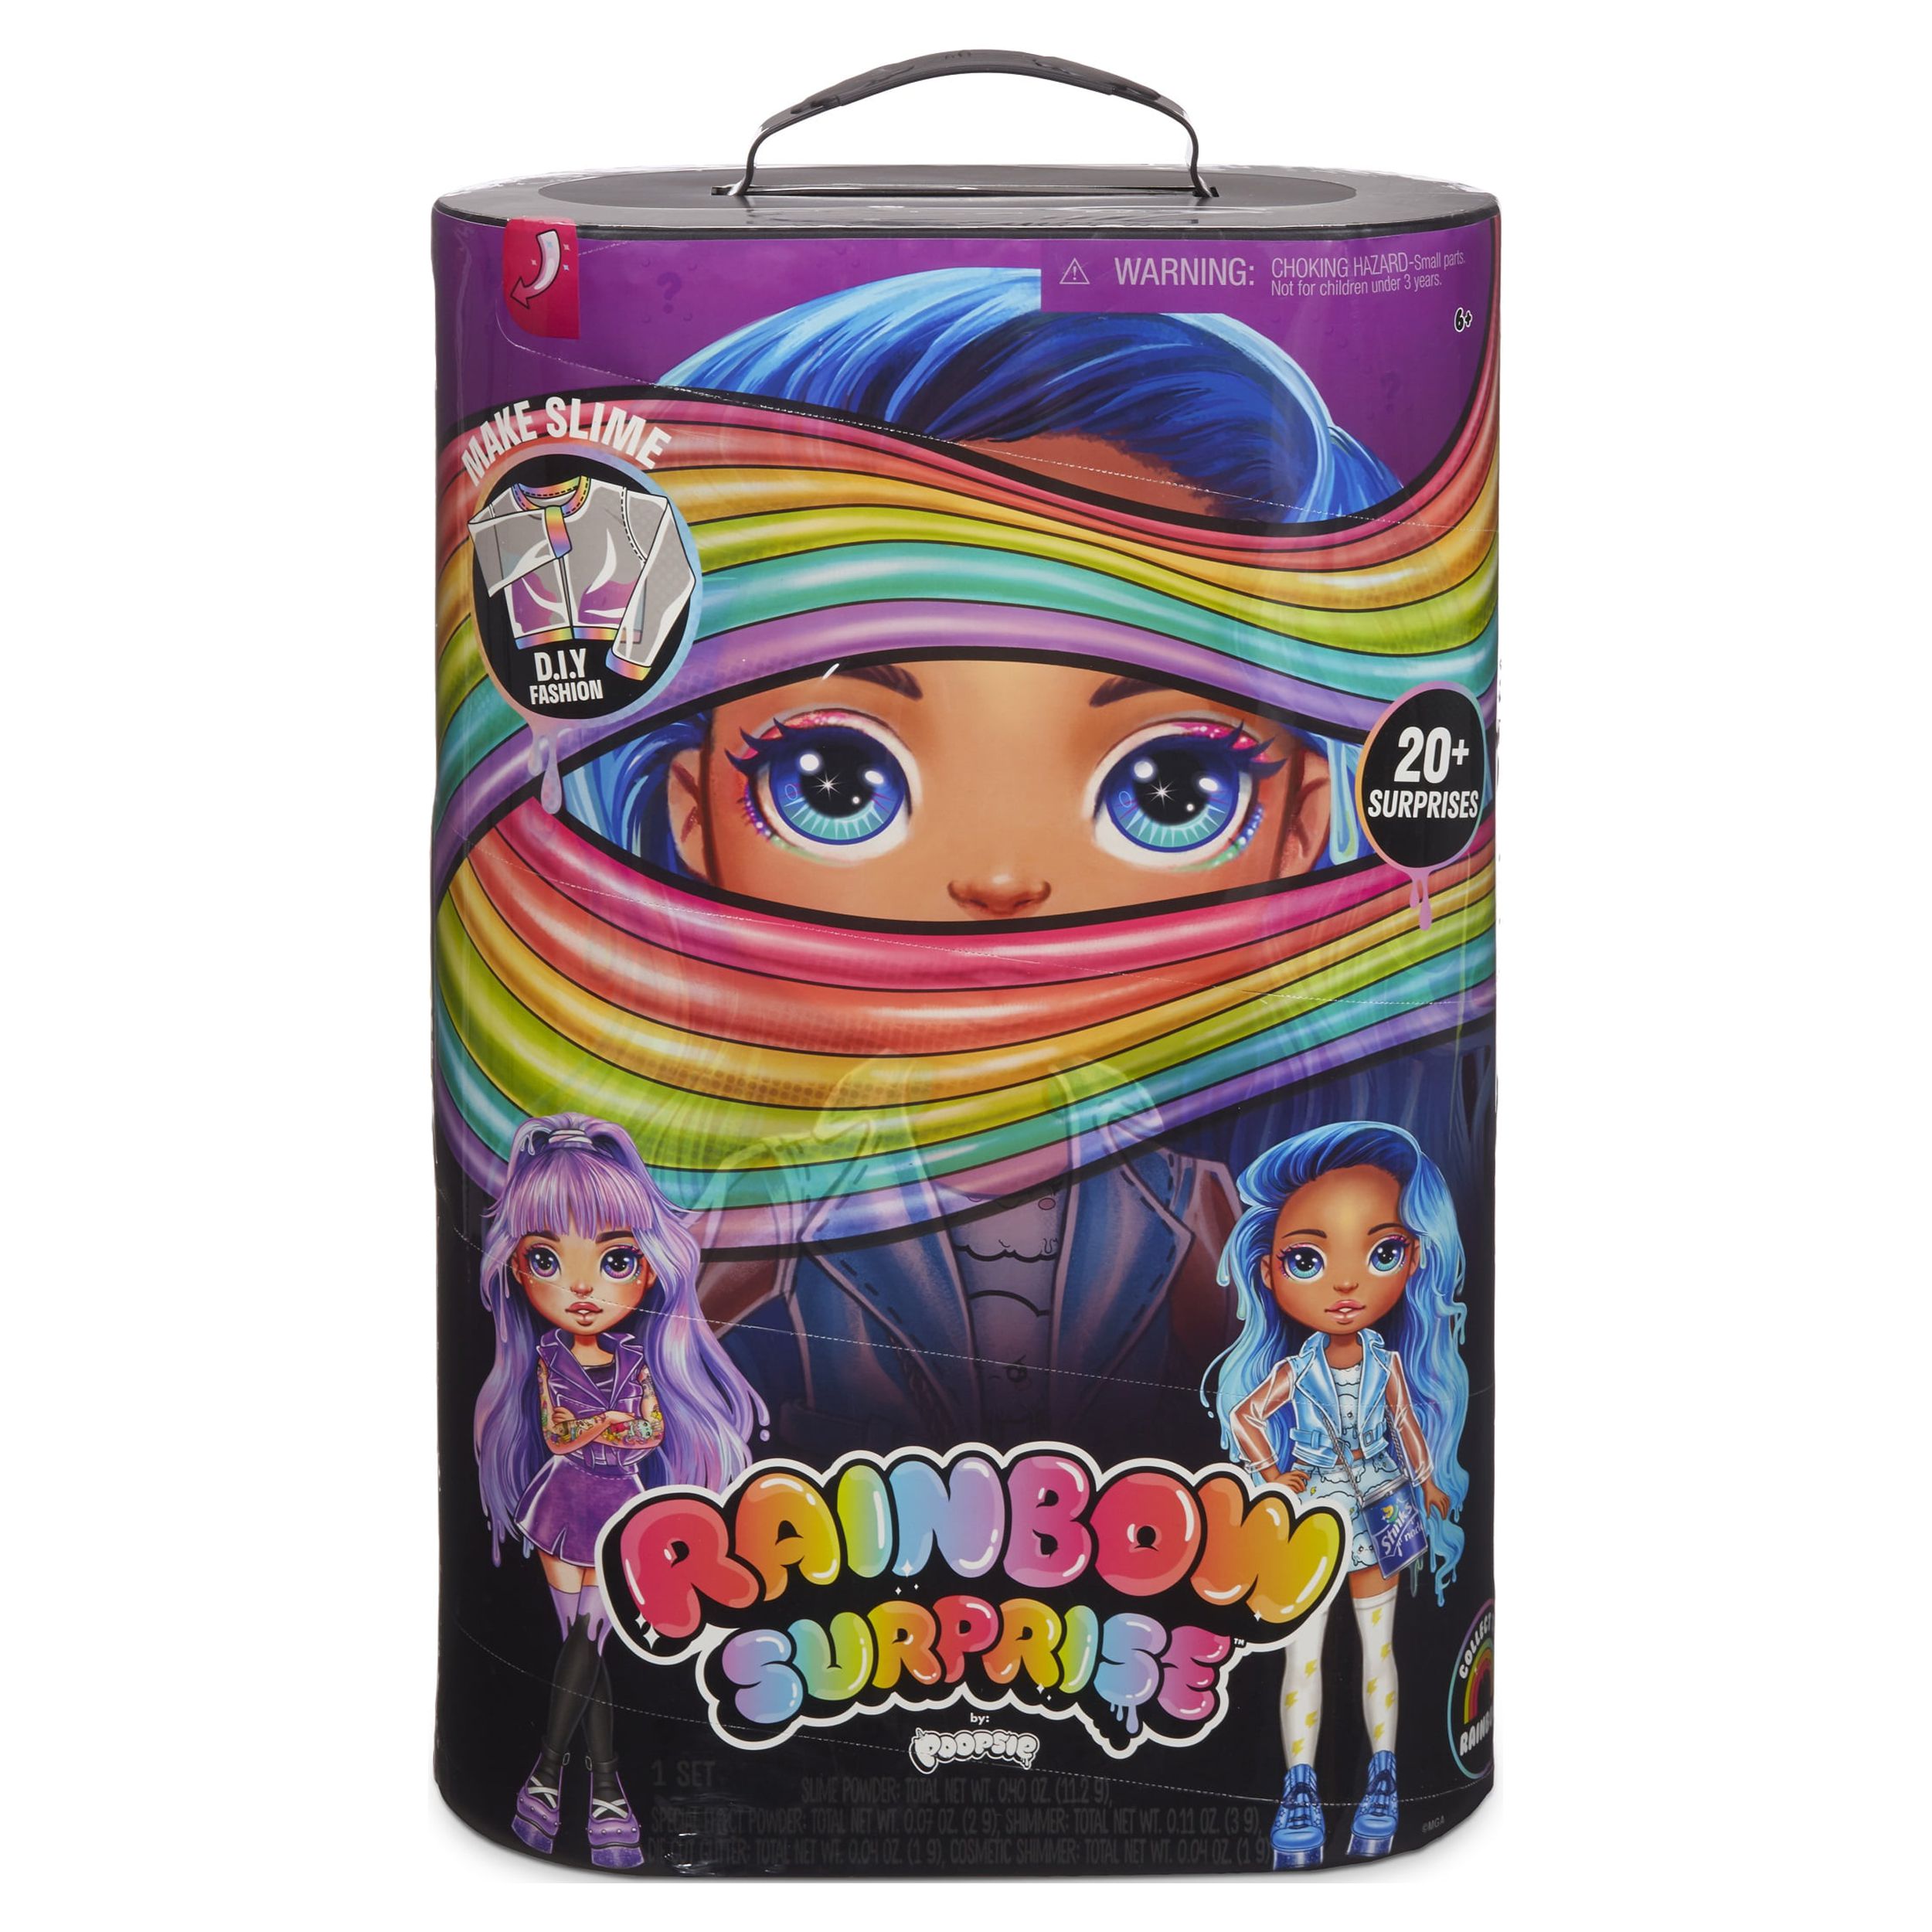 Rainbow Surprise by Poopsie: 14" Doll with 20+ Slime & Fashion Surprises, Amethyst Rae or Blue Skye - image 1 of 7